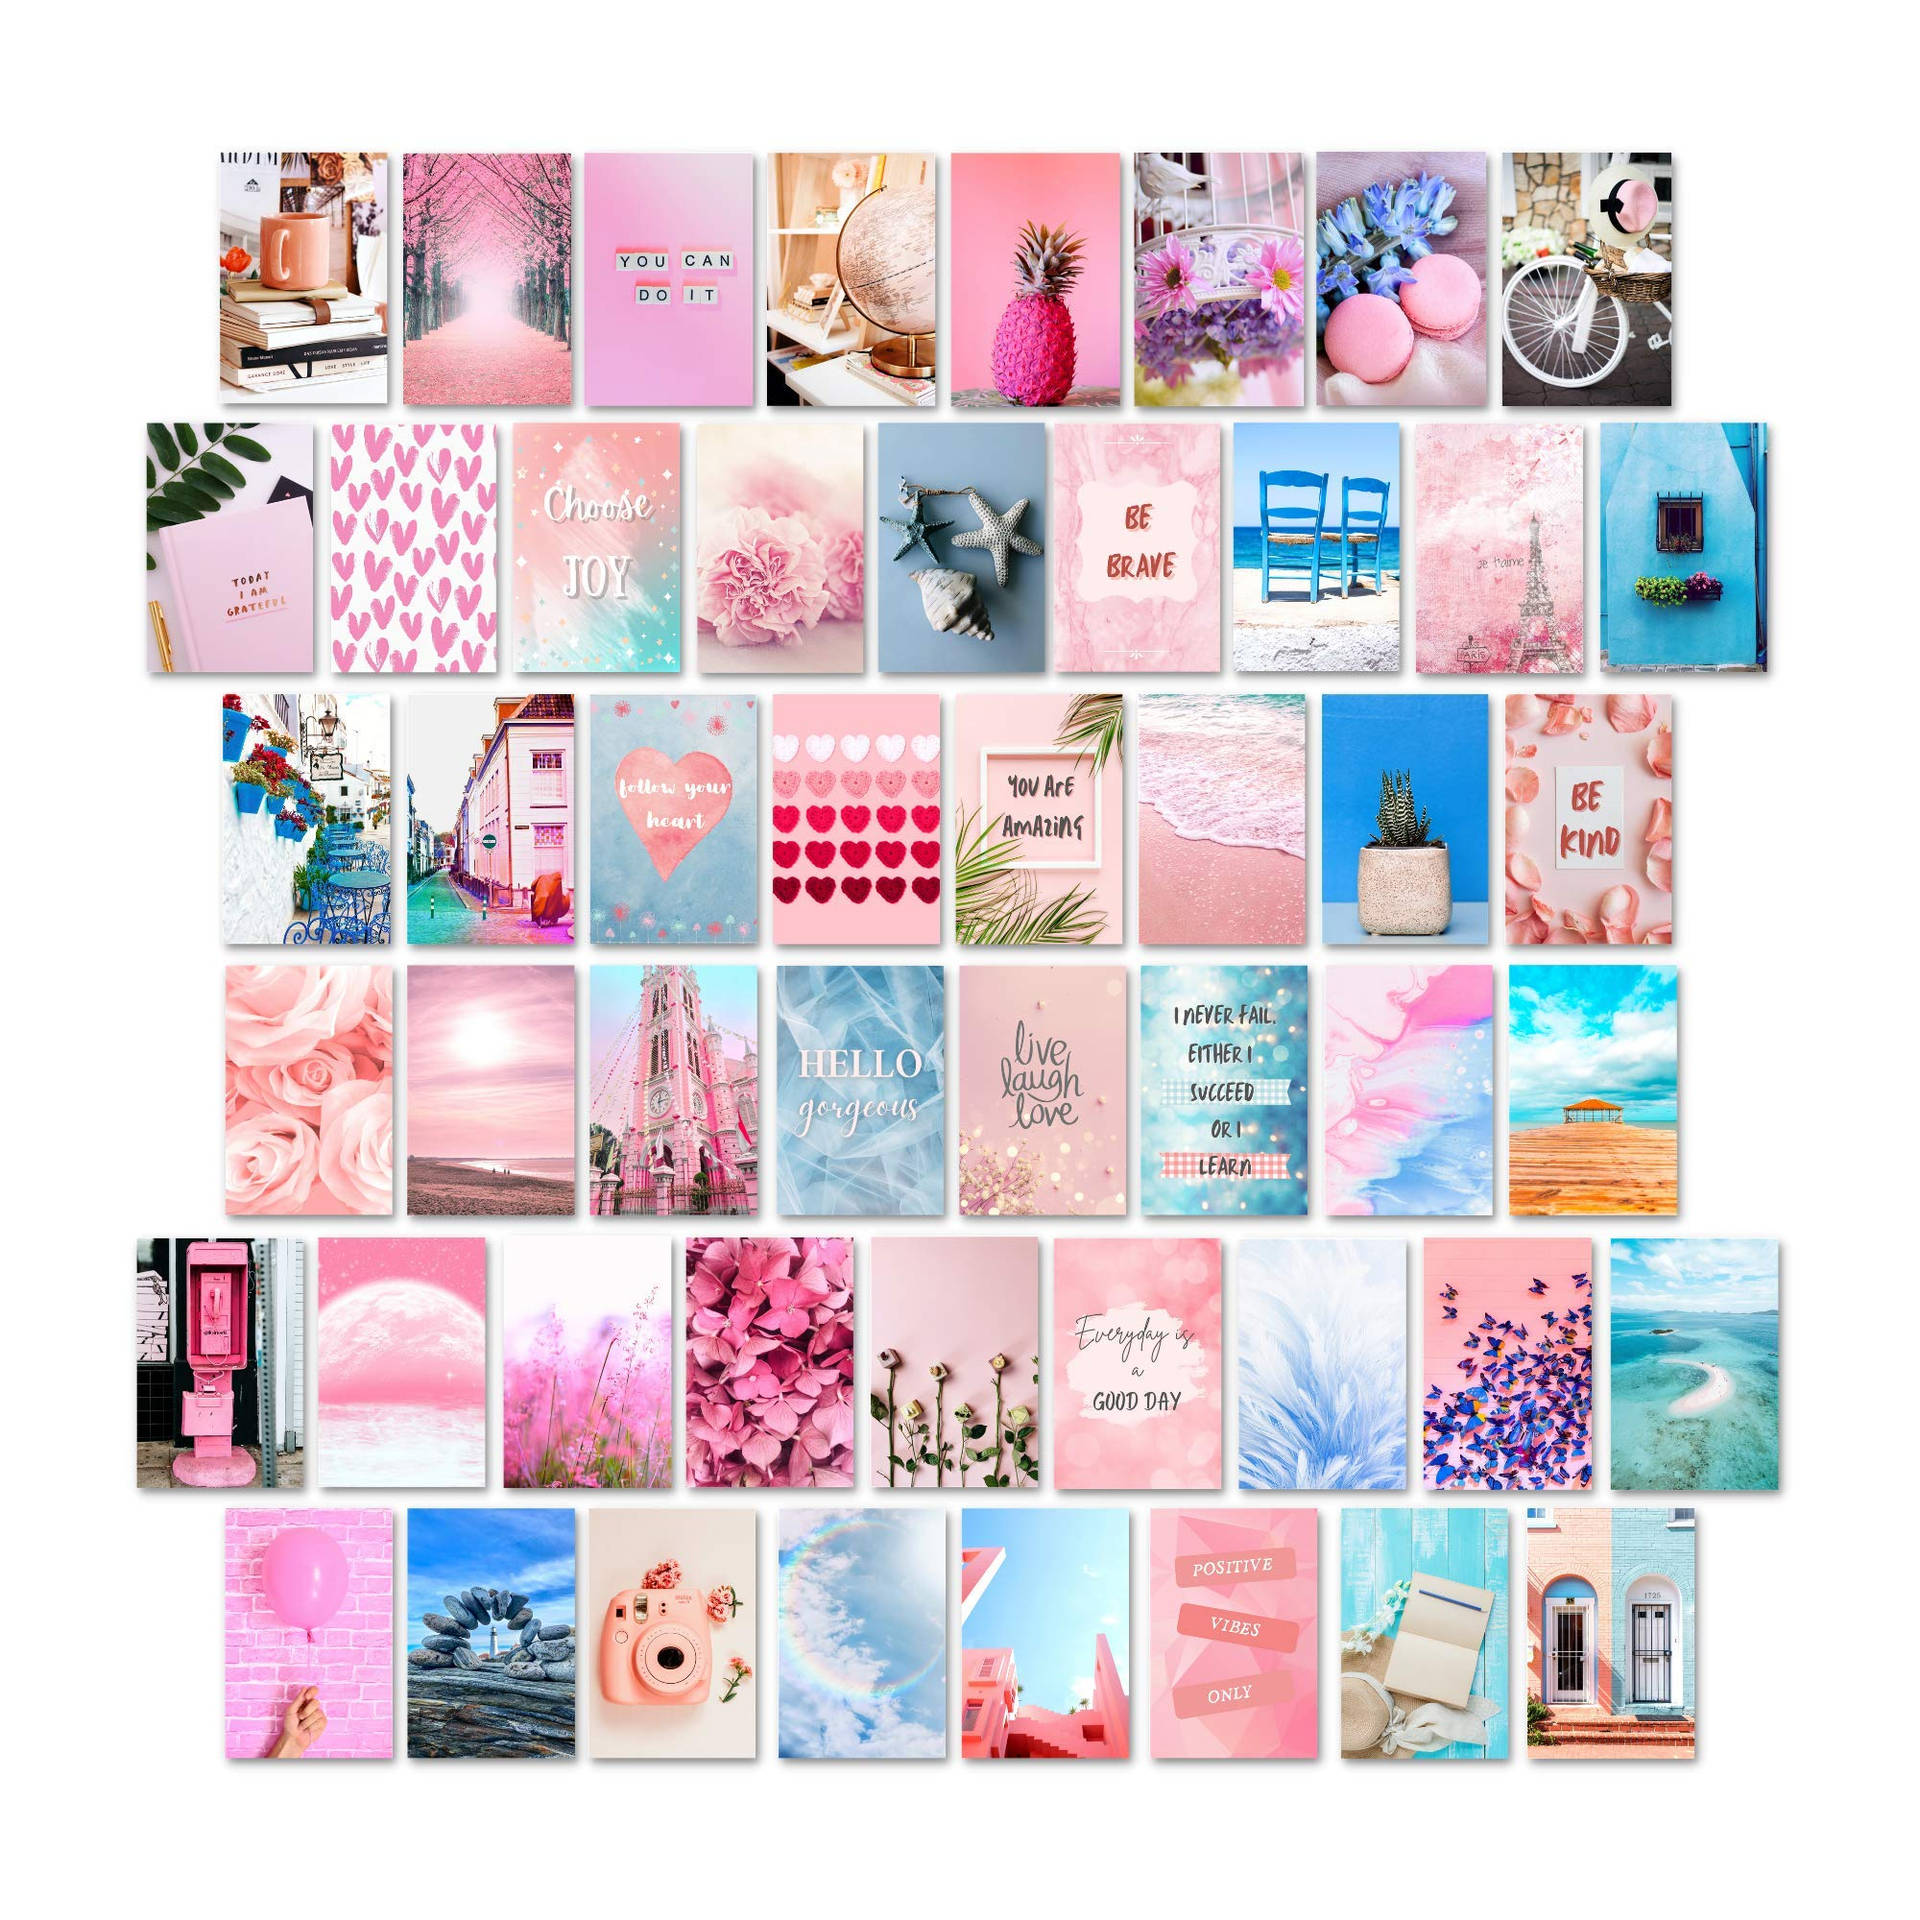 Cute Collage Pink And Blue Aesthetic Wallpaper